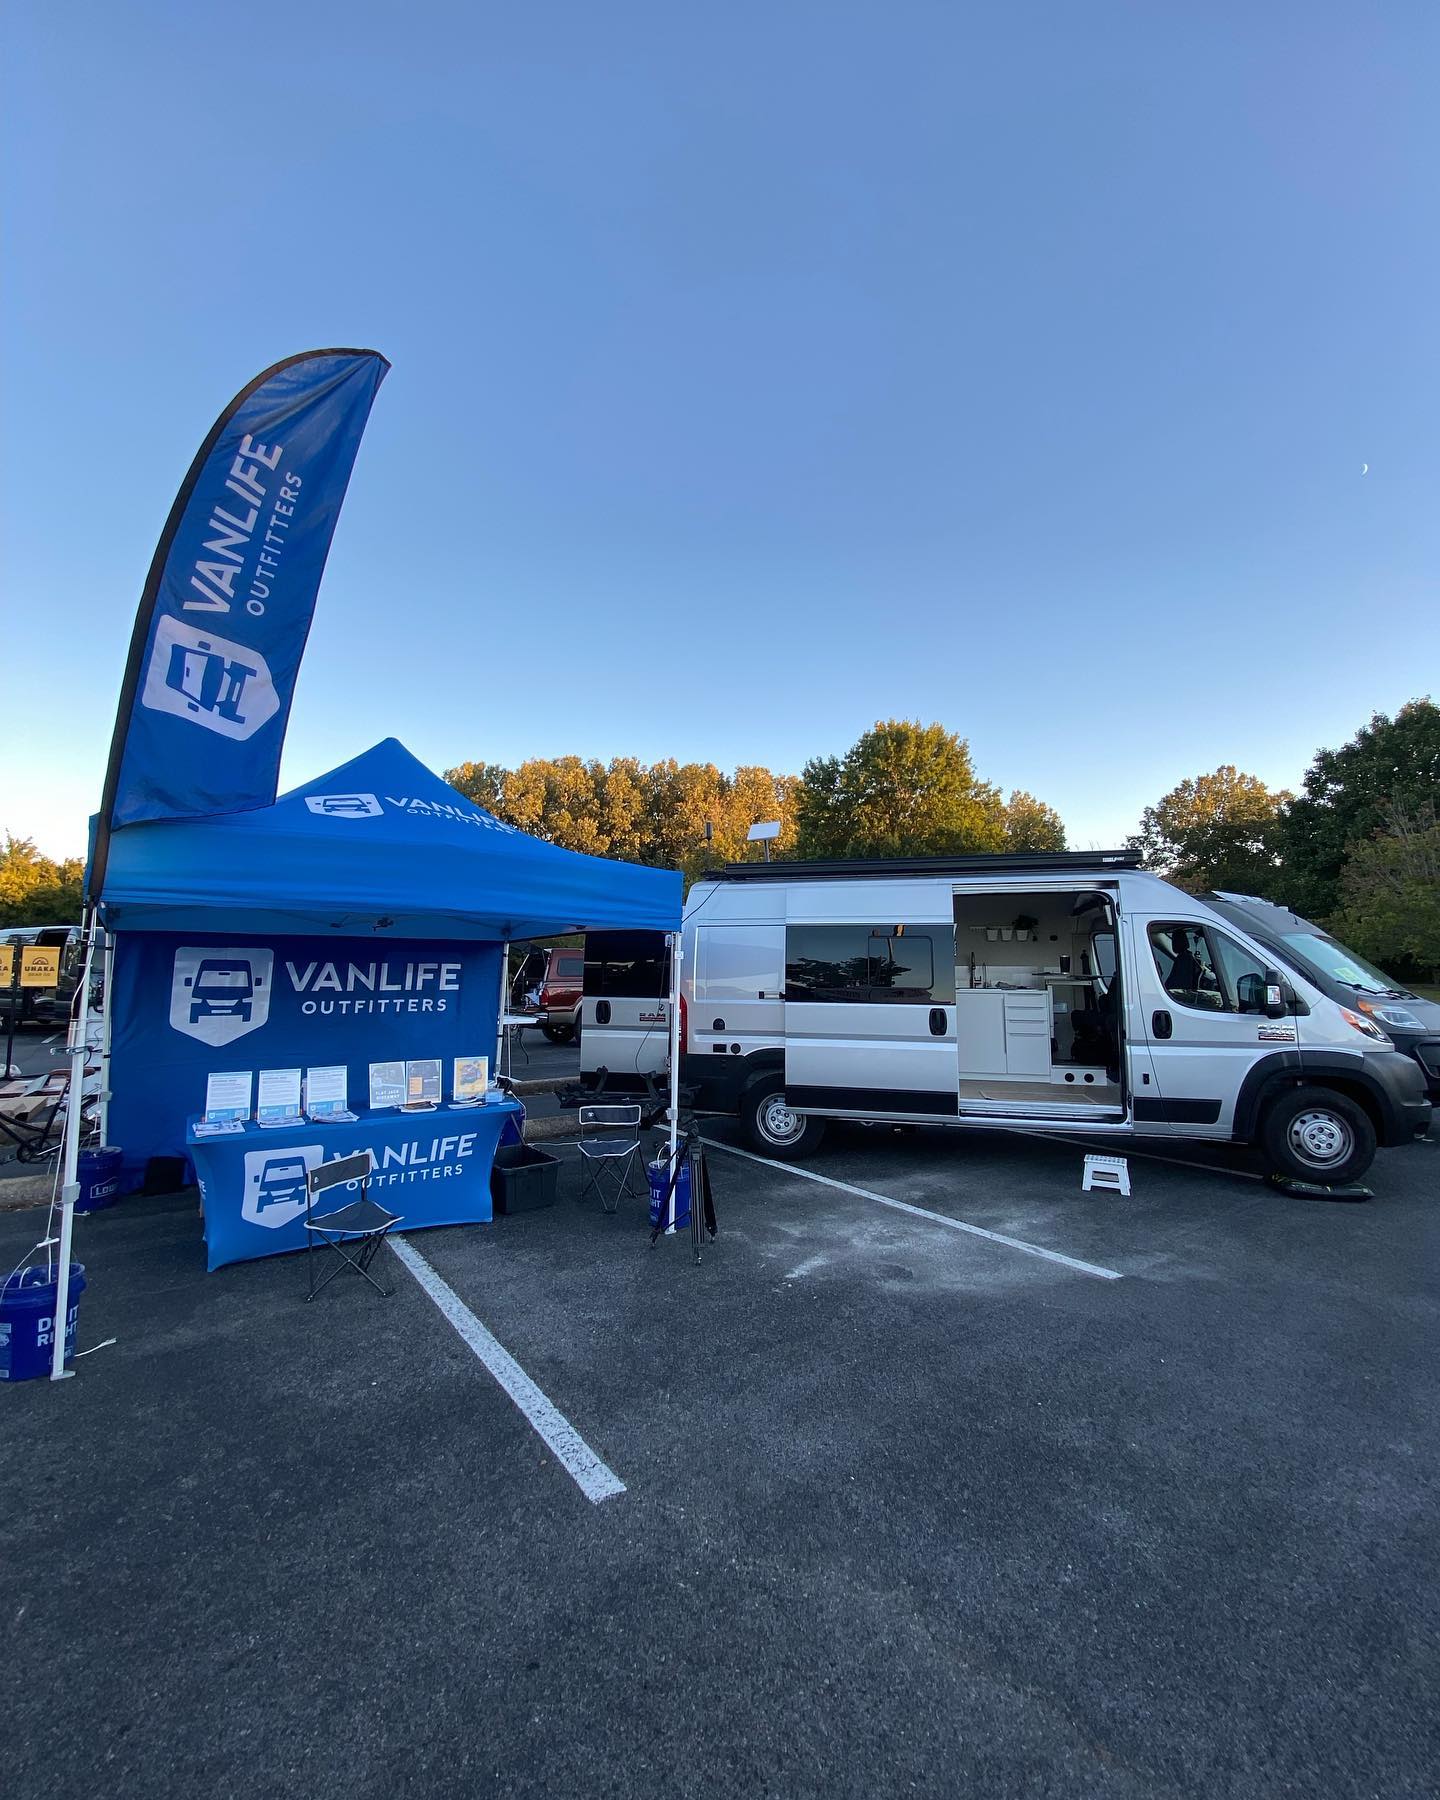 The @AdventureVanxpo is in Chattanooga, TN this weekend Oct 1 - 2… and we are joining them! We will be there all weekend with our products on display - come chat with our team!   In addition to the two days of van vendors, open house vans, and van life community the event will feature live music, local food trucks and brews. Stay the entire weekend, hangout with us and camp at the show.    See you there?! 🚐   #fun #repost #vanlife #sprintervanlife #rv #explore #Sprintervanconversion #4x4van #sprinter4x4 #vanconversions #vanlifers #hoodriver #exploremore #vandwellinglife #adventure #vanlifeideas #vancrush #livingsmall #homeiswhereyouparkit  #vanlifemovement #outsidevan #modvans #sportsmobile  #expeditionportal